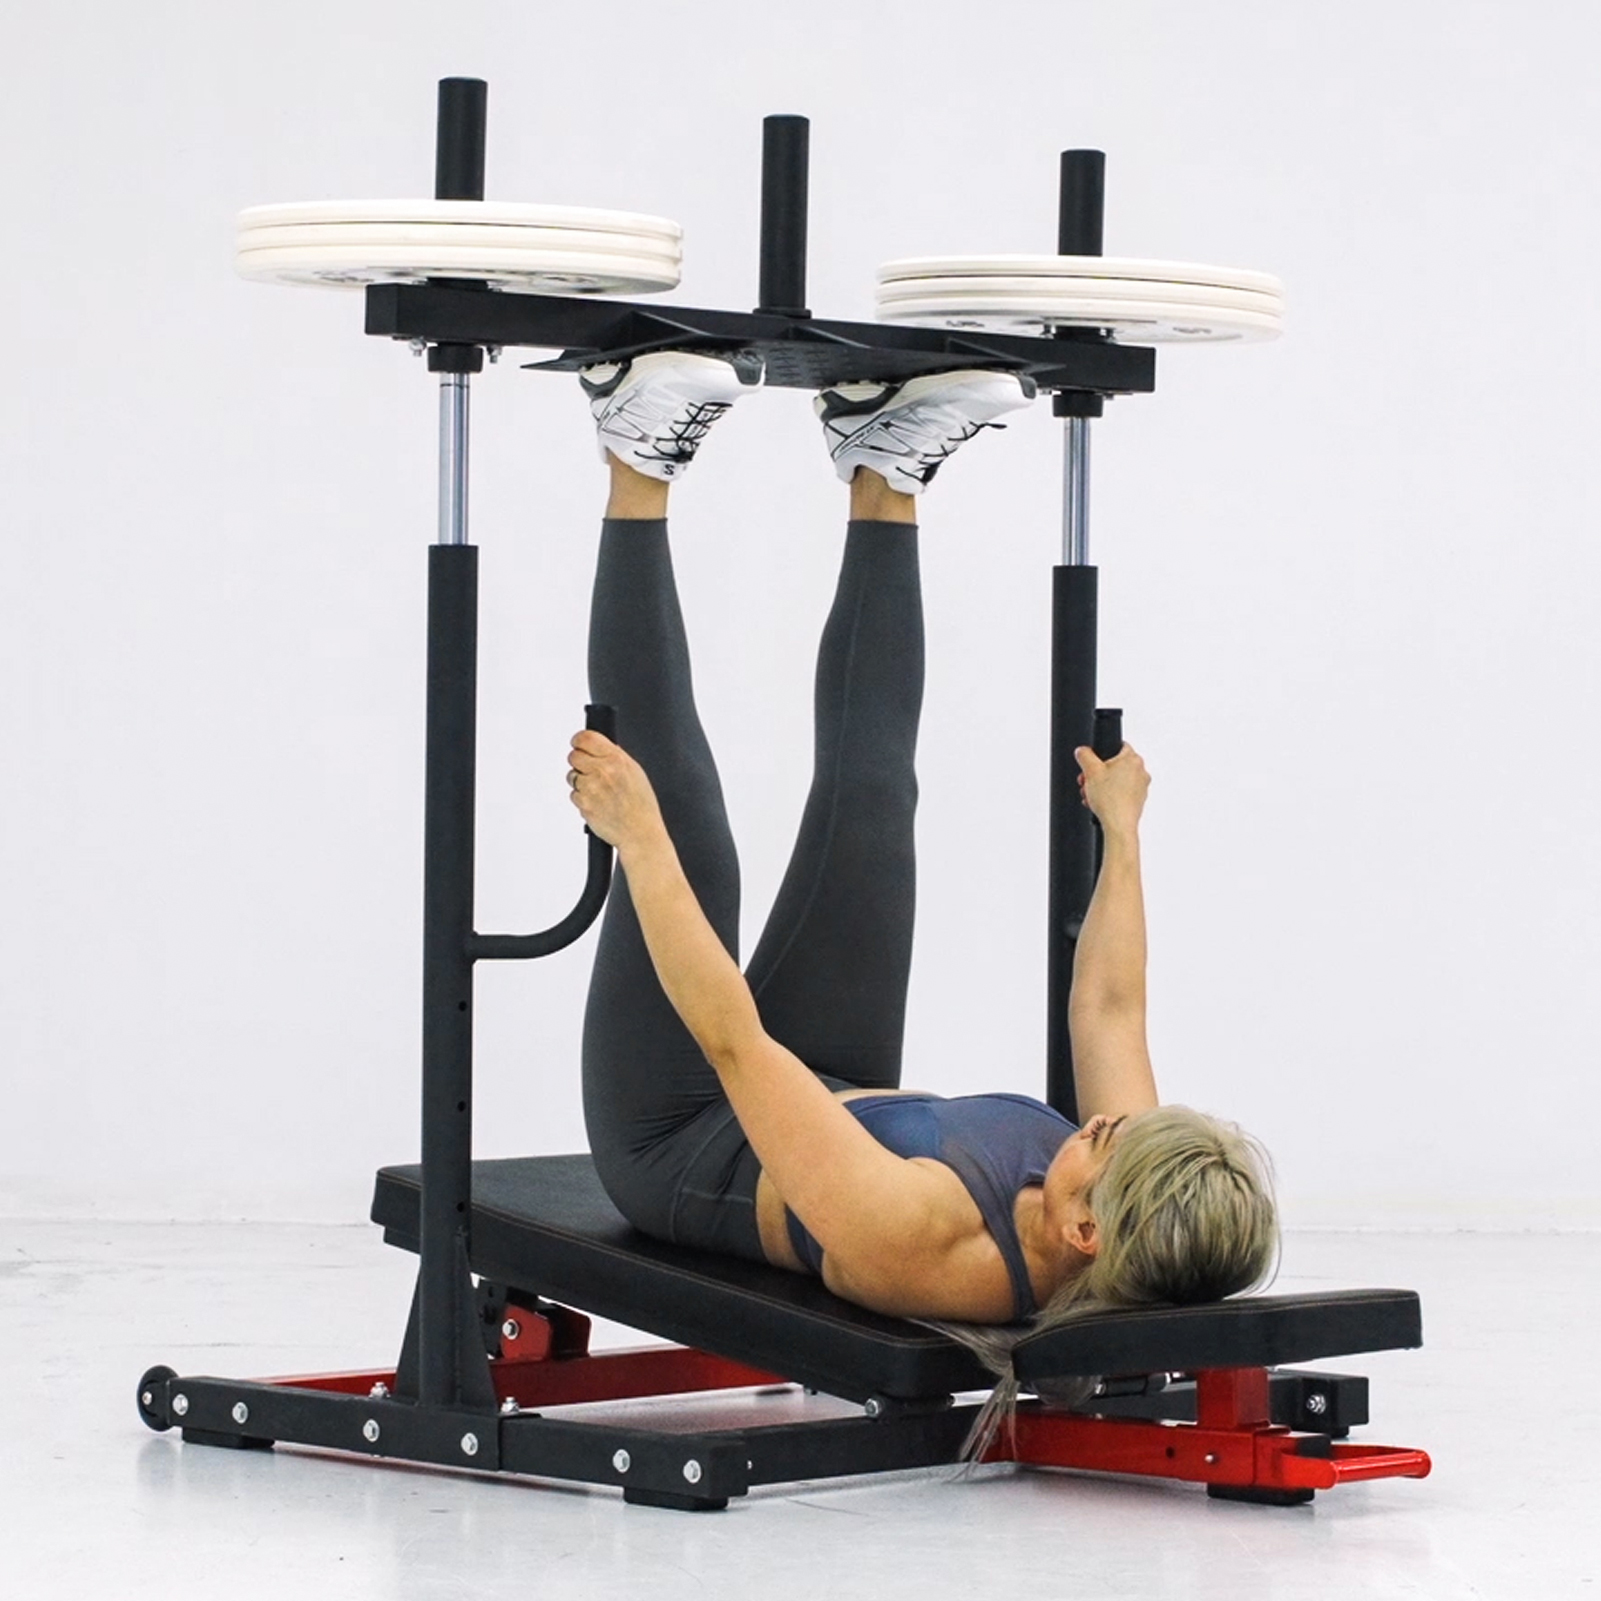 The Plate Loaded Chest Press features 3 back pad adjustments or starti